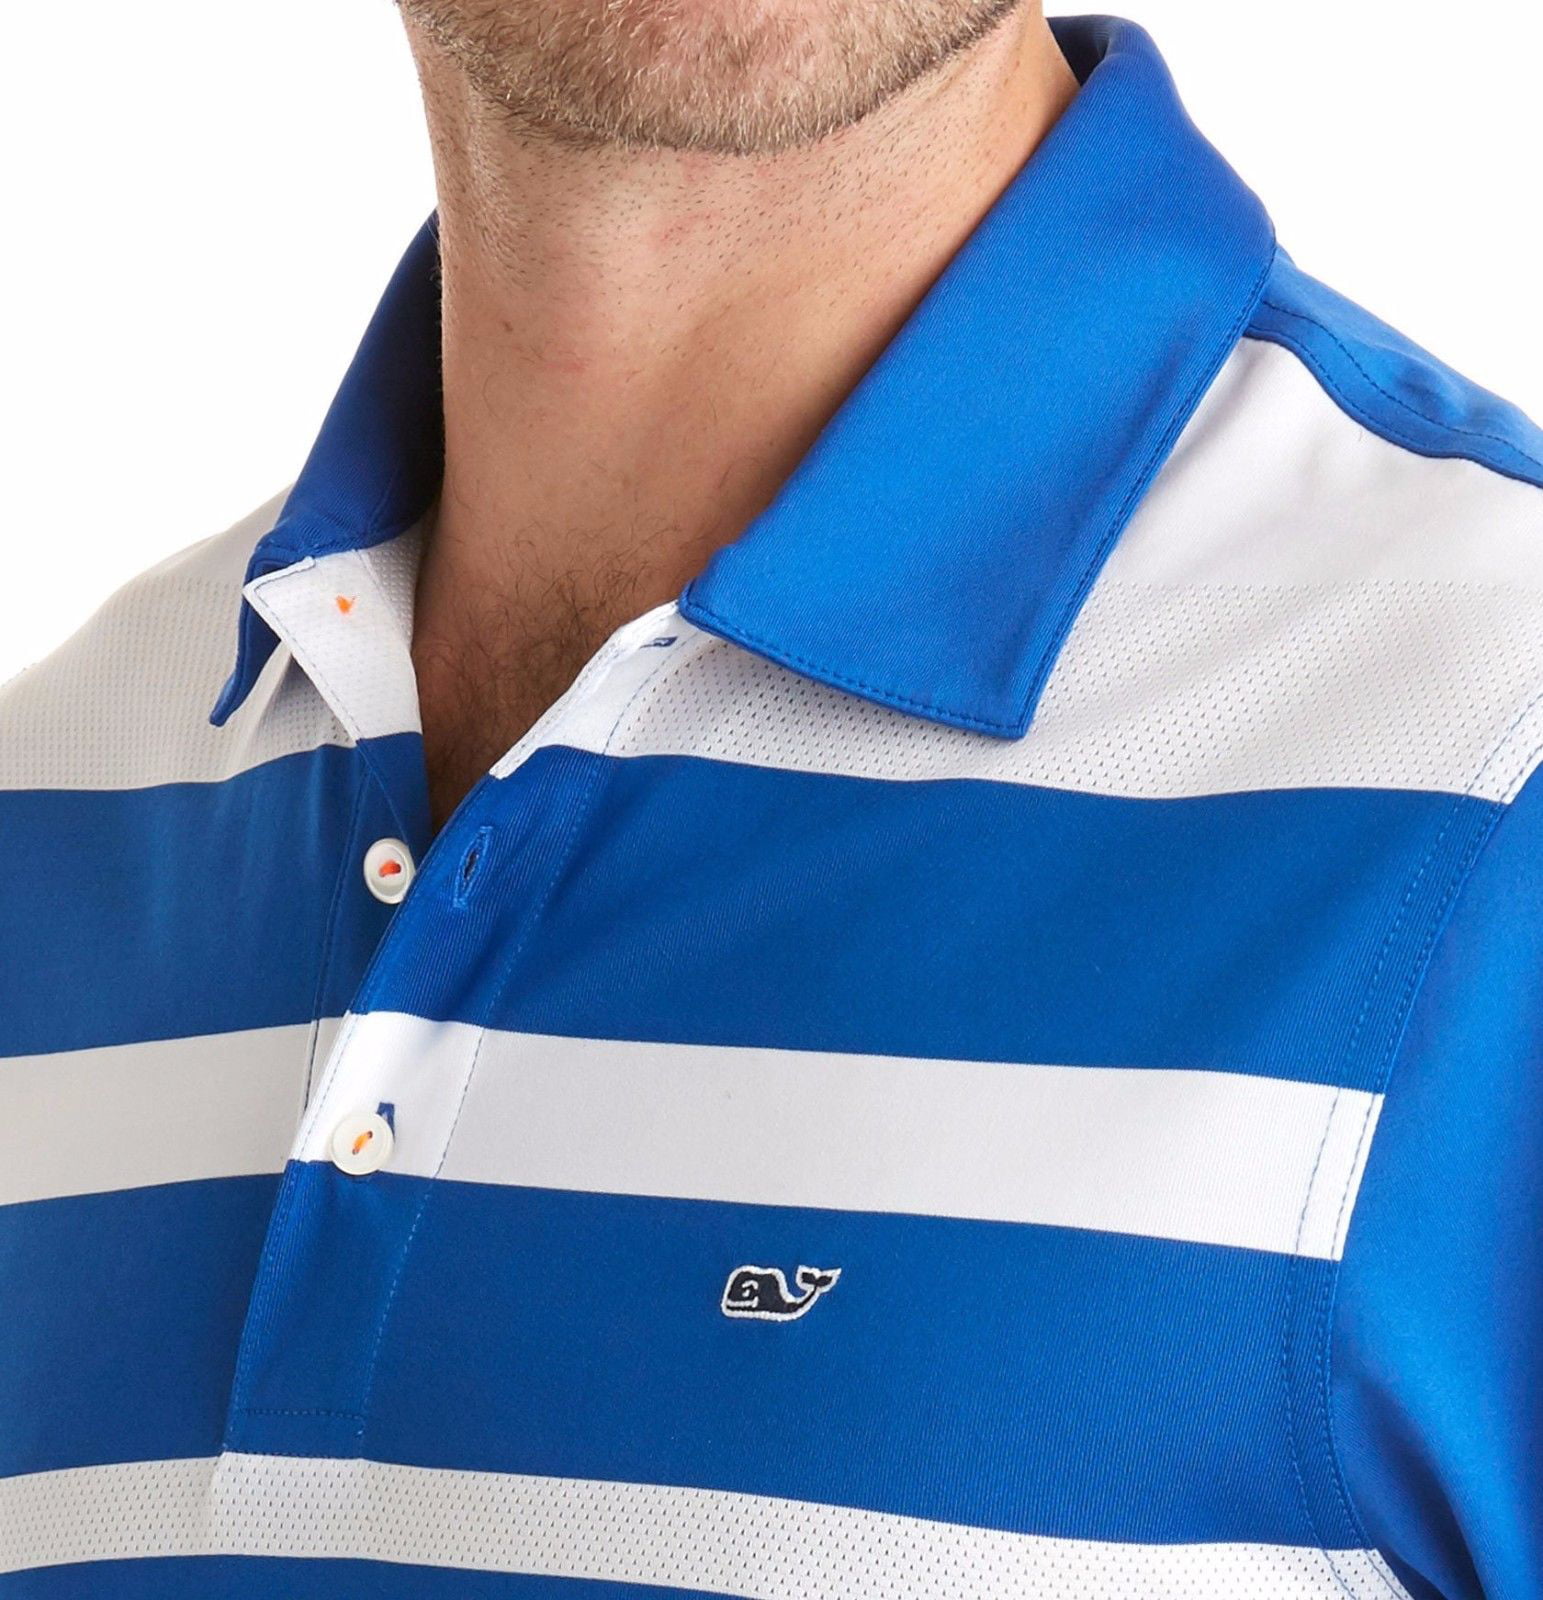 Details about   Vineyard Vines Boy's Engineer Stripe Performance Polo in Kingfisher  $49.50 